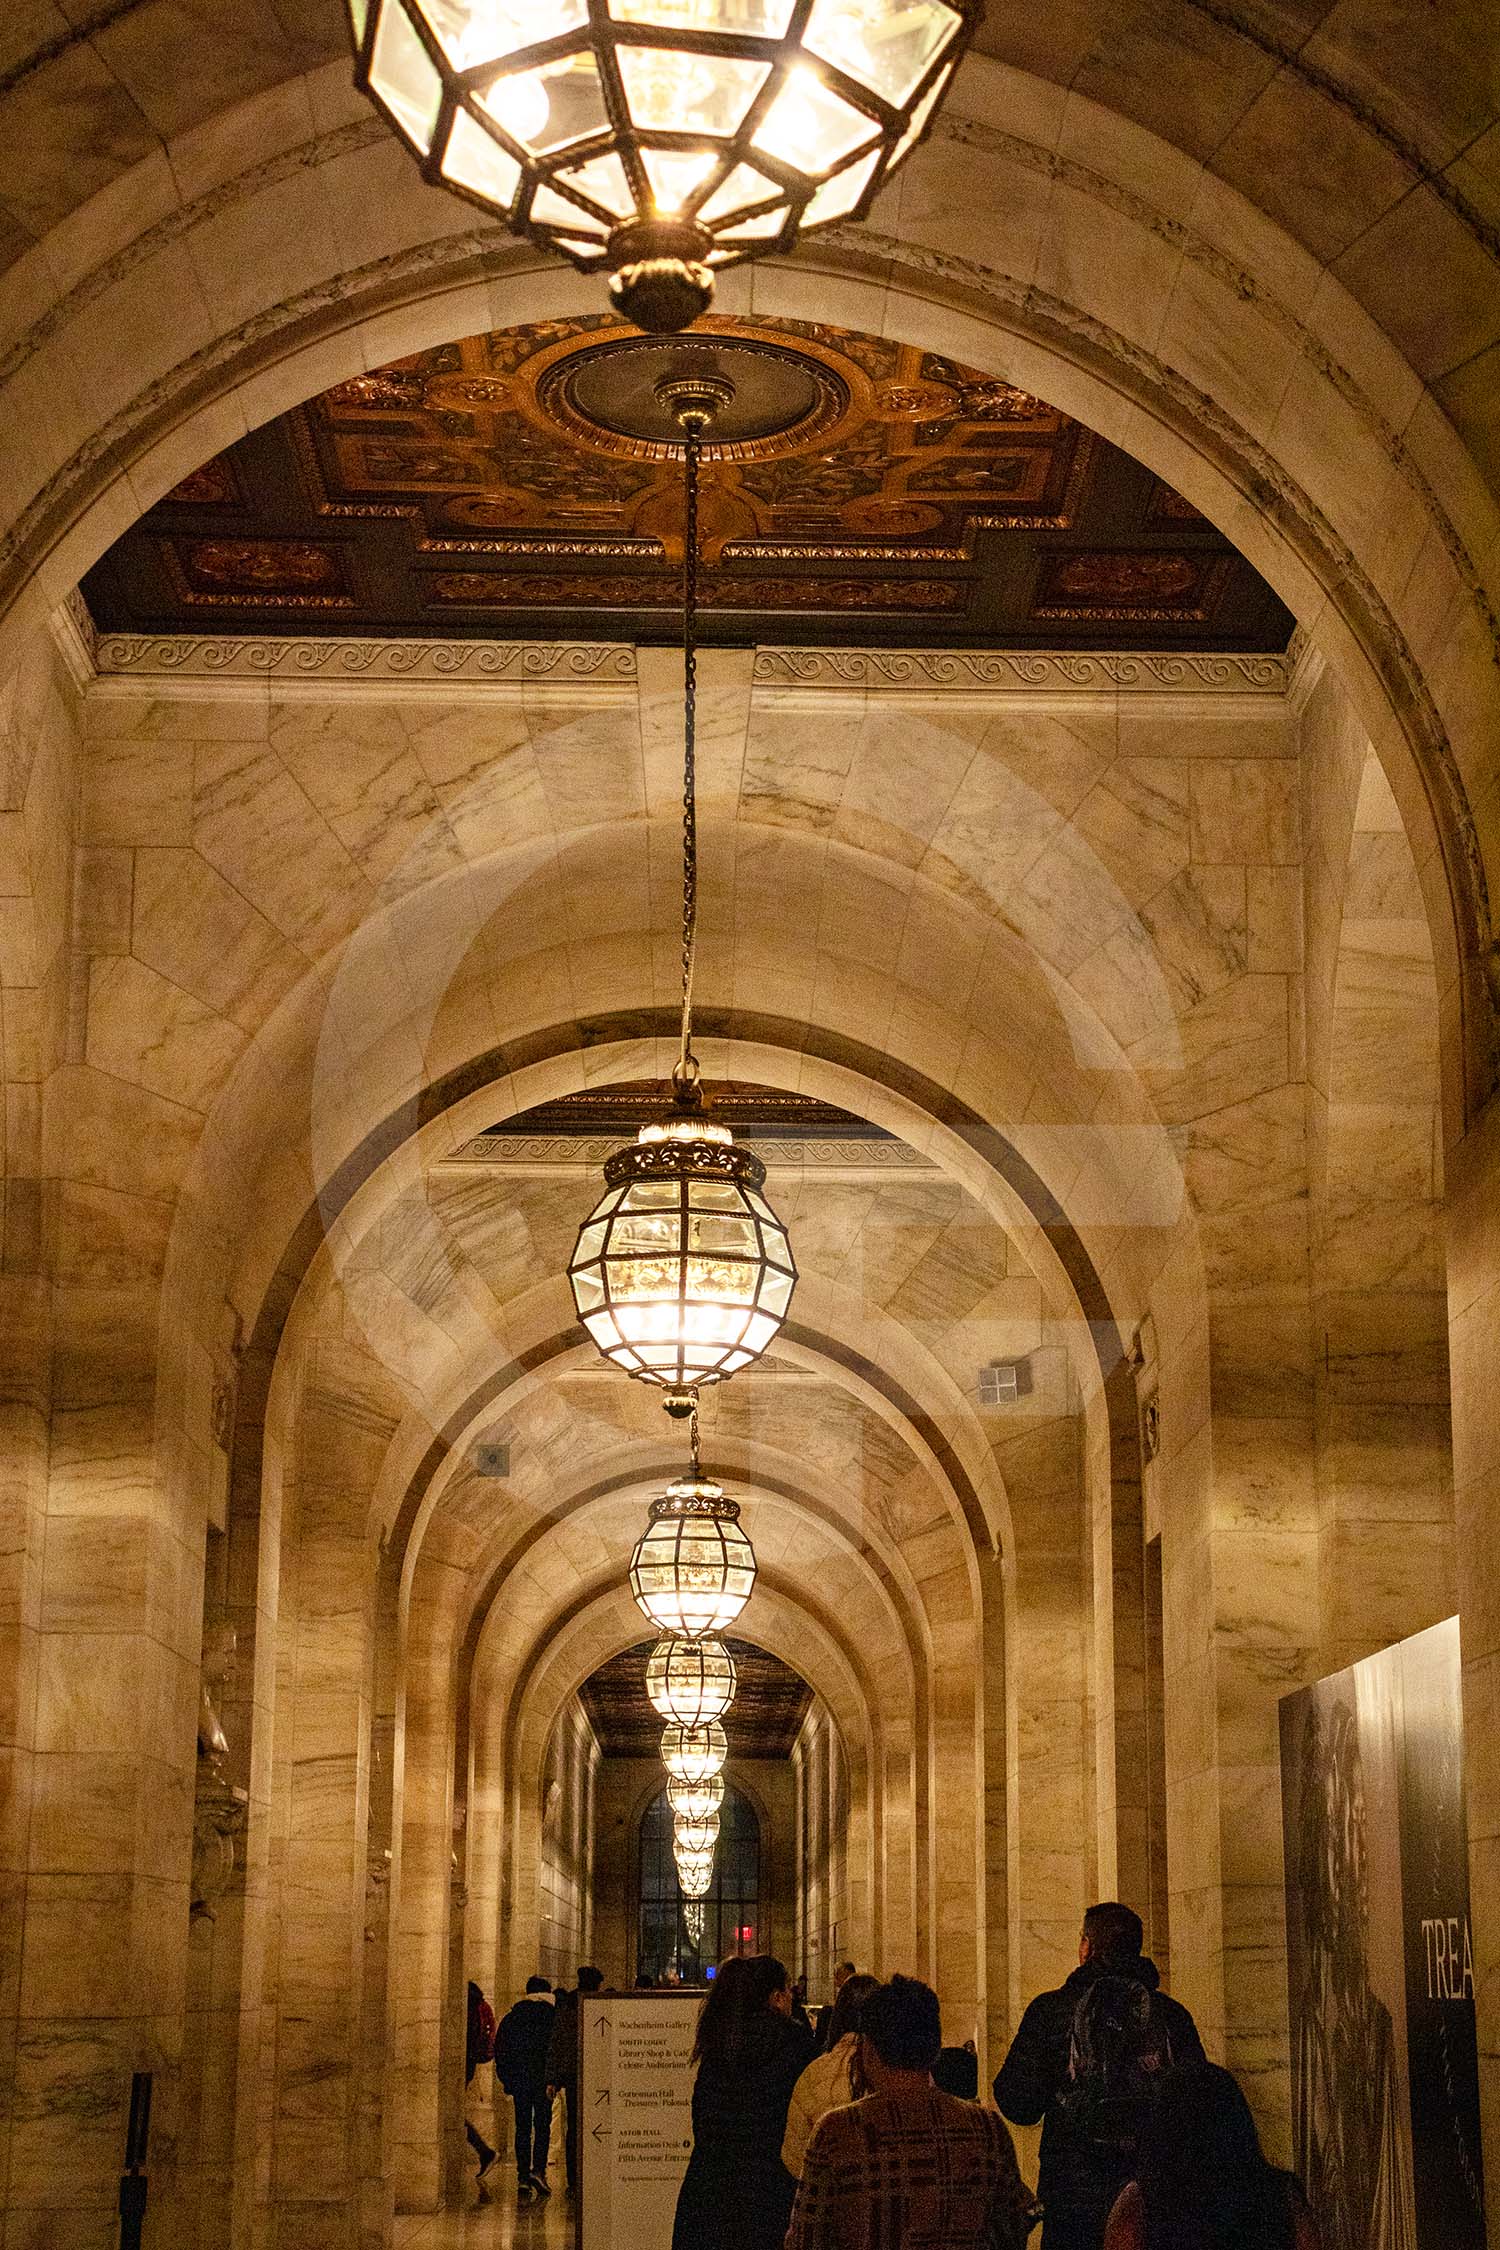 hallway with chandeliers and ceiling with ornate patterns